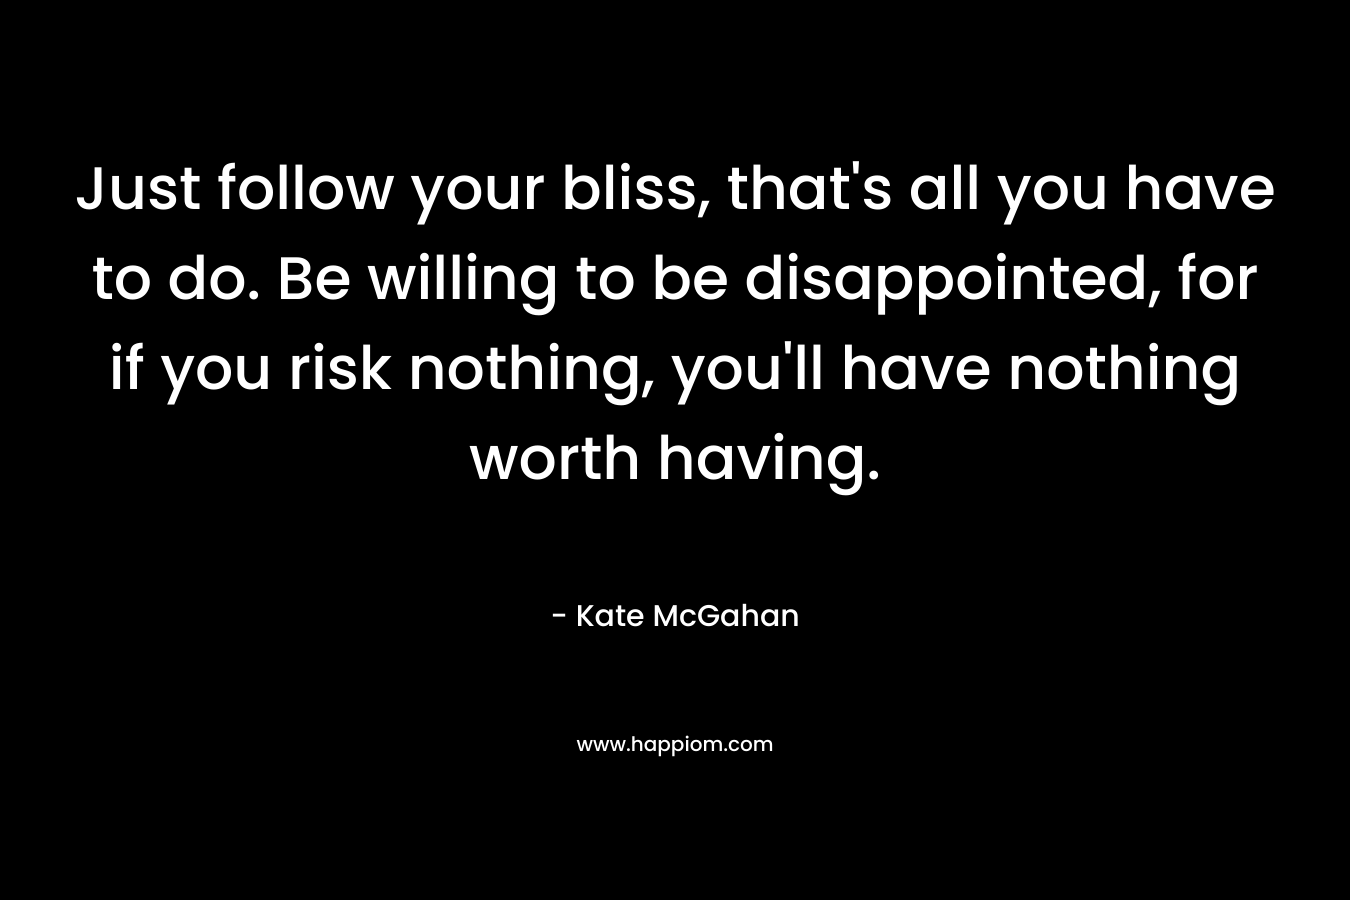 Just follow your bliss, that’s all you have to do. Be willing to be disappointed, for if you risk nothing, you’ll have nothing worth having. – Kate McGahan